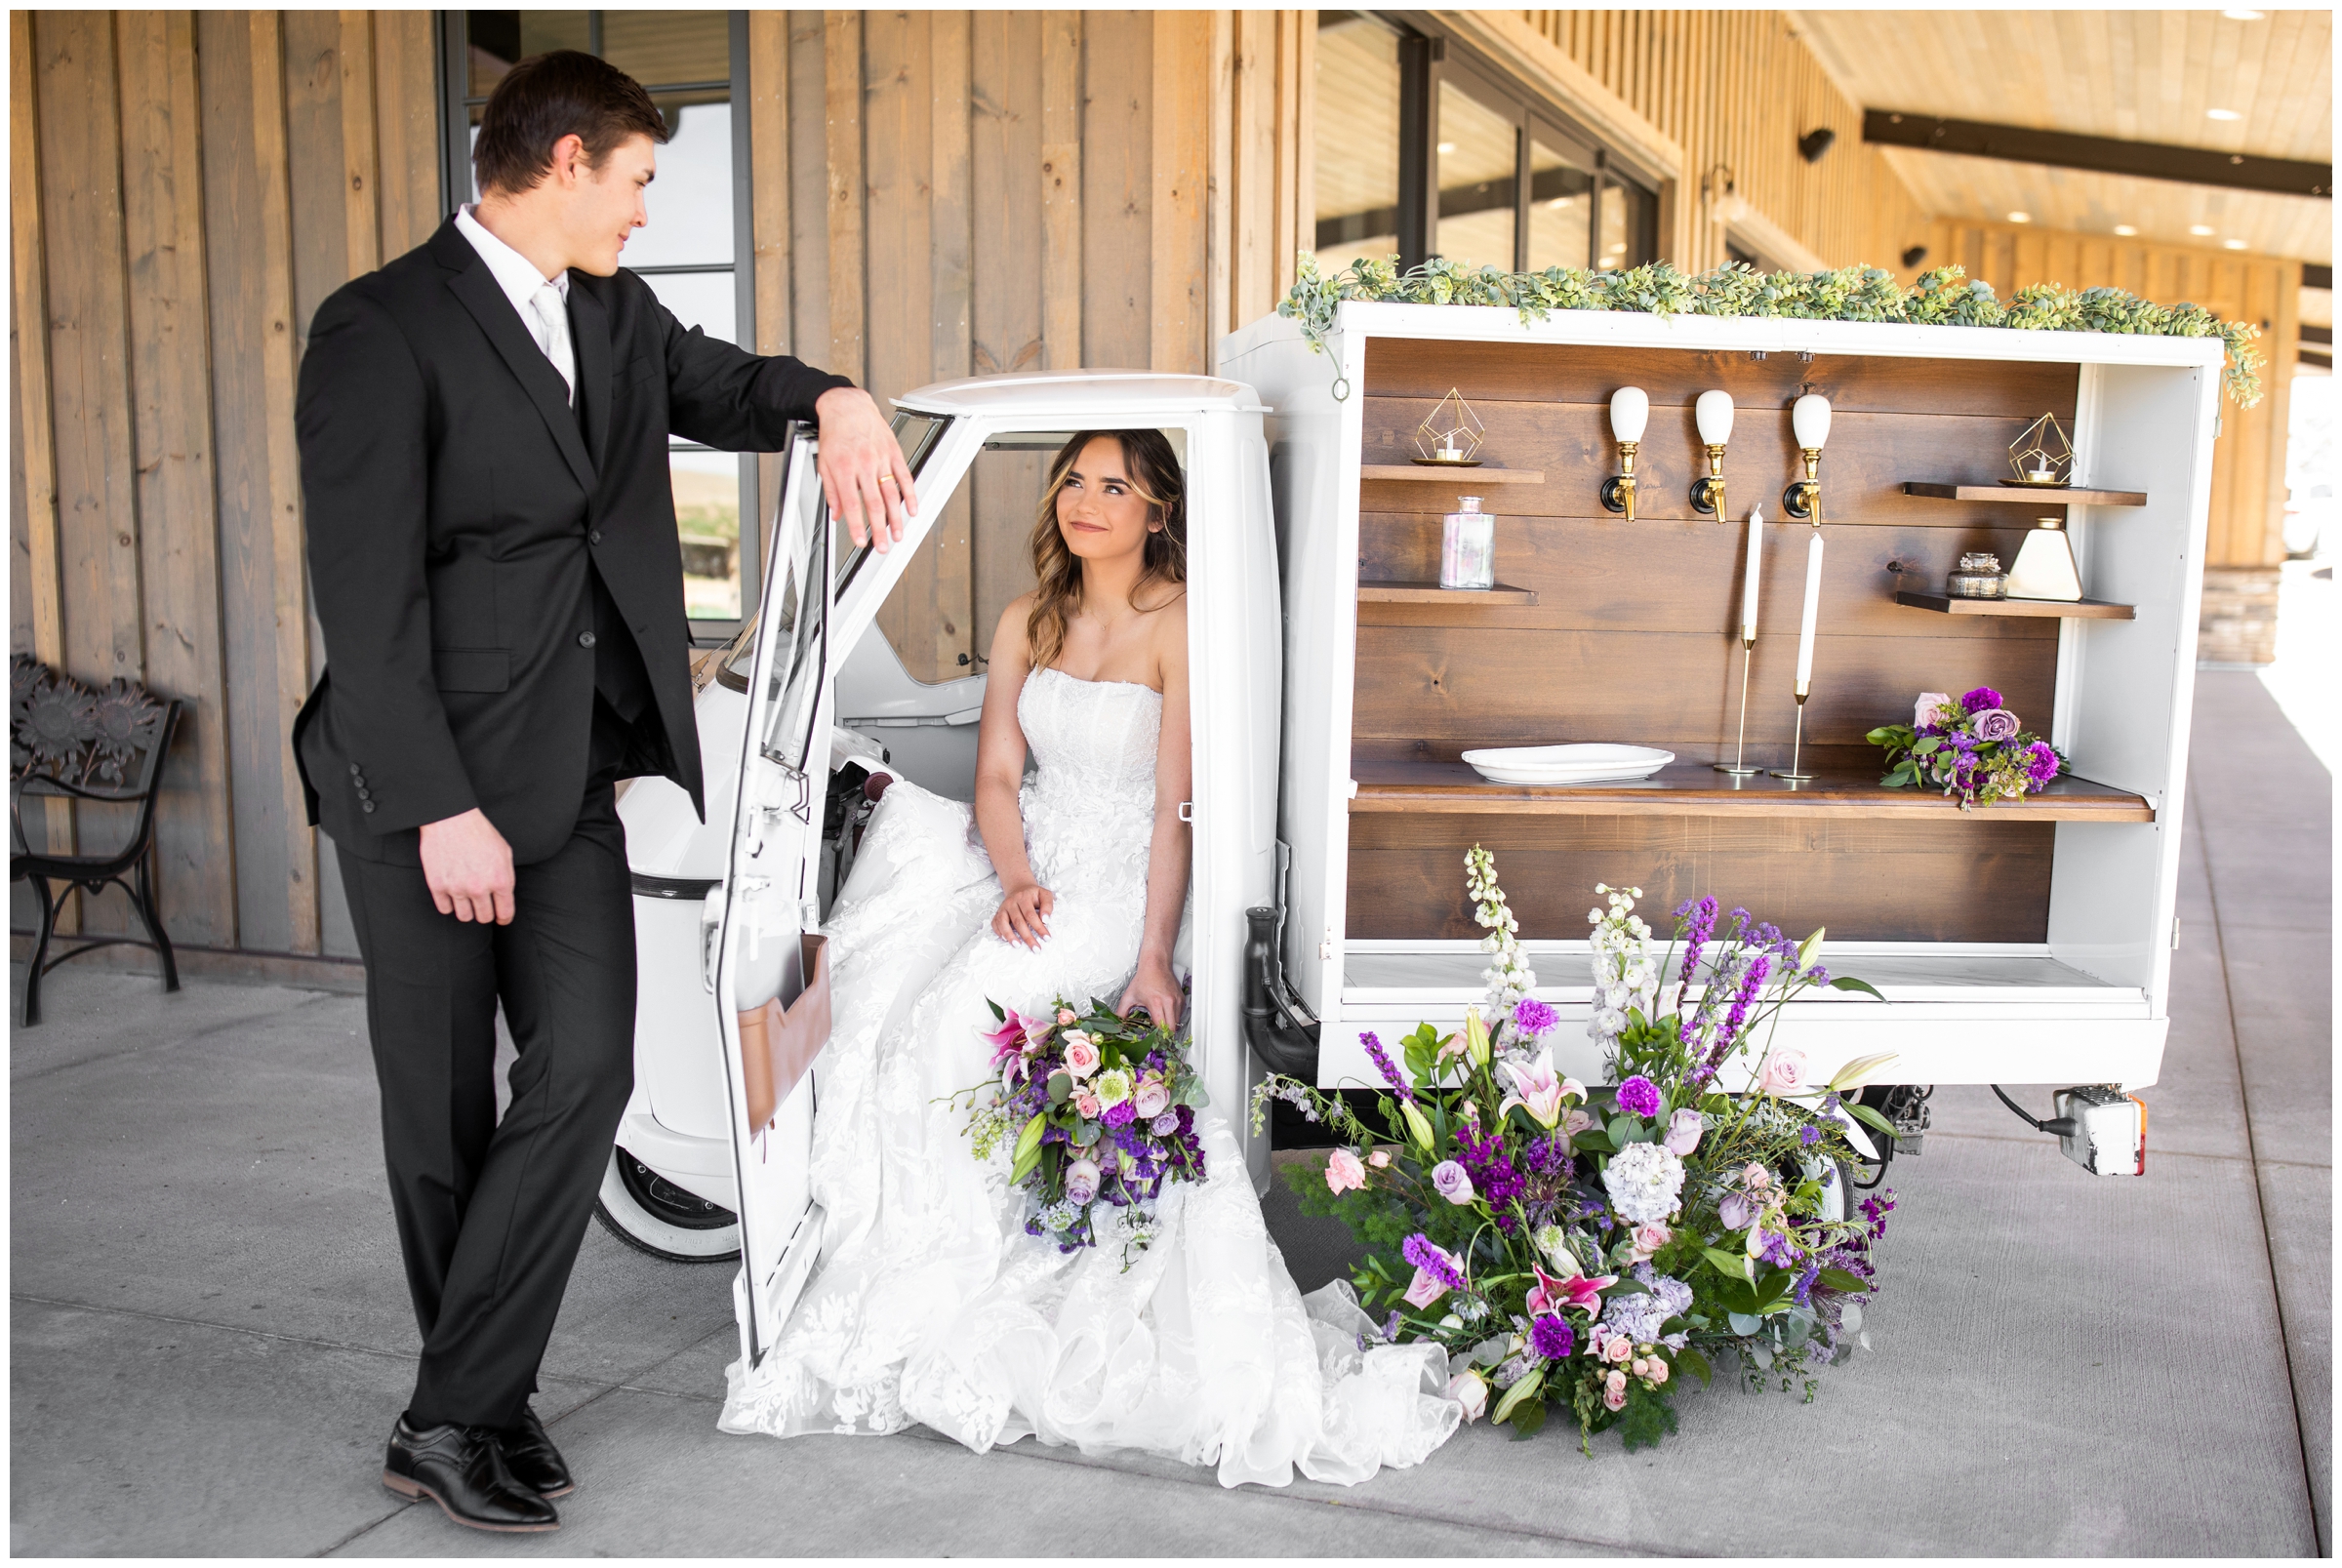 couple posing in La Piccolina mobile bar cart during Bonnie Blues Colorado wedding photos by Plum Pretty Photography